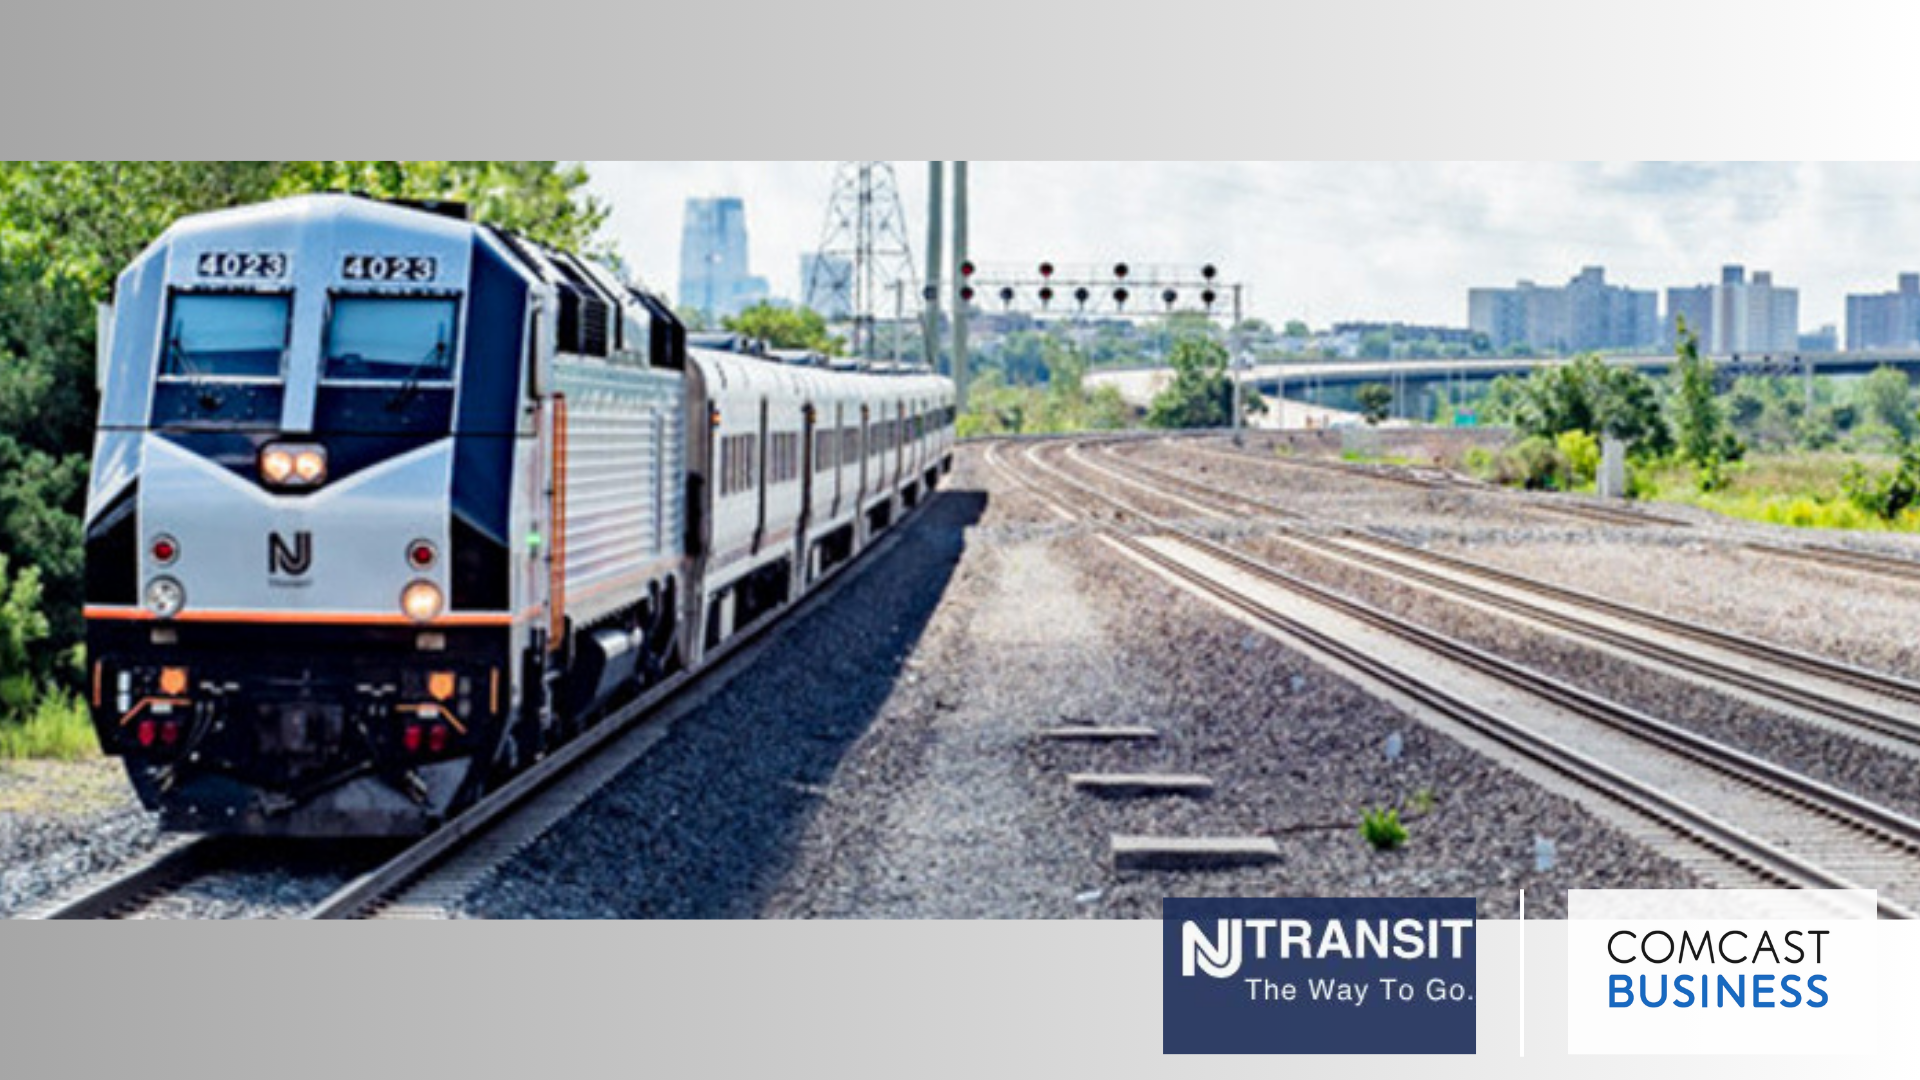 Comcast Business Delivers Innovative Technology Solutions to NJ TRANSIT